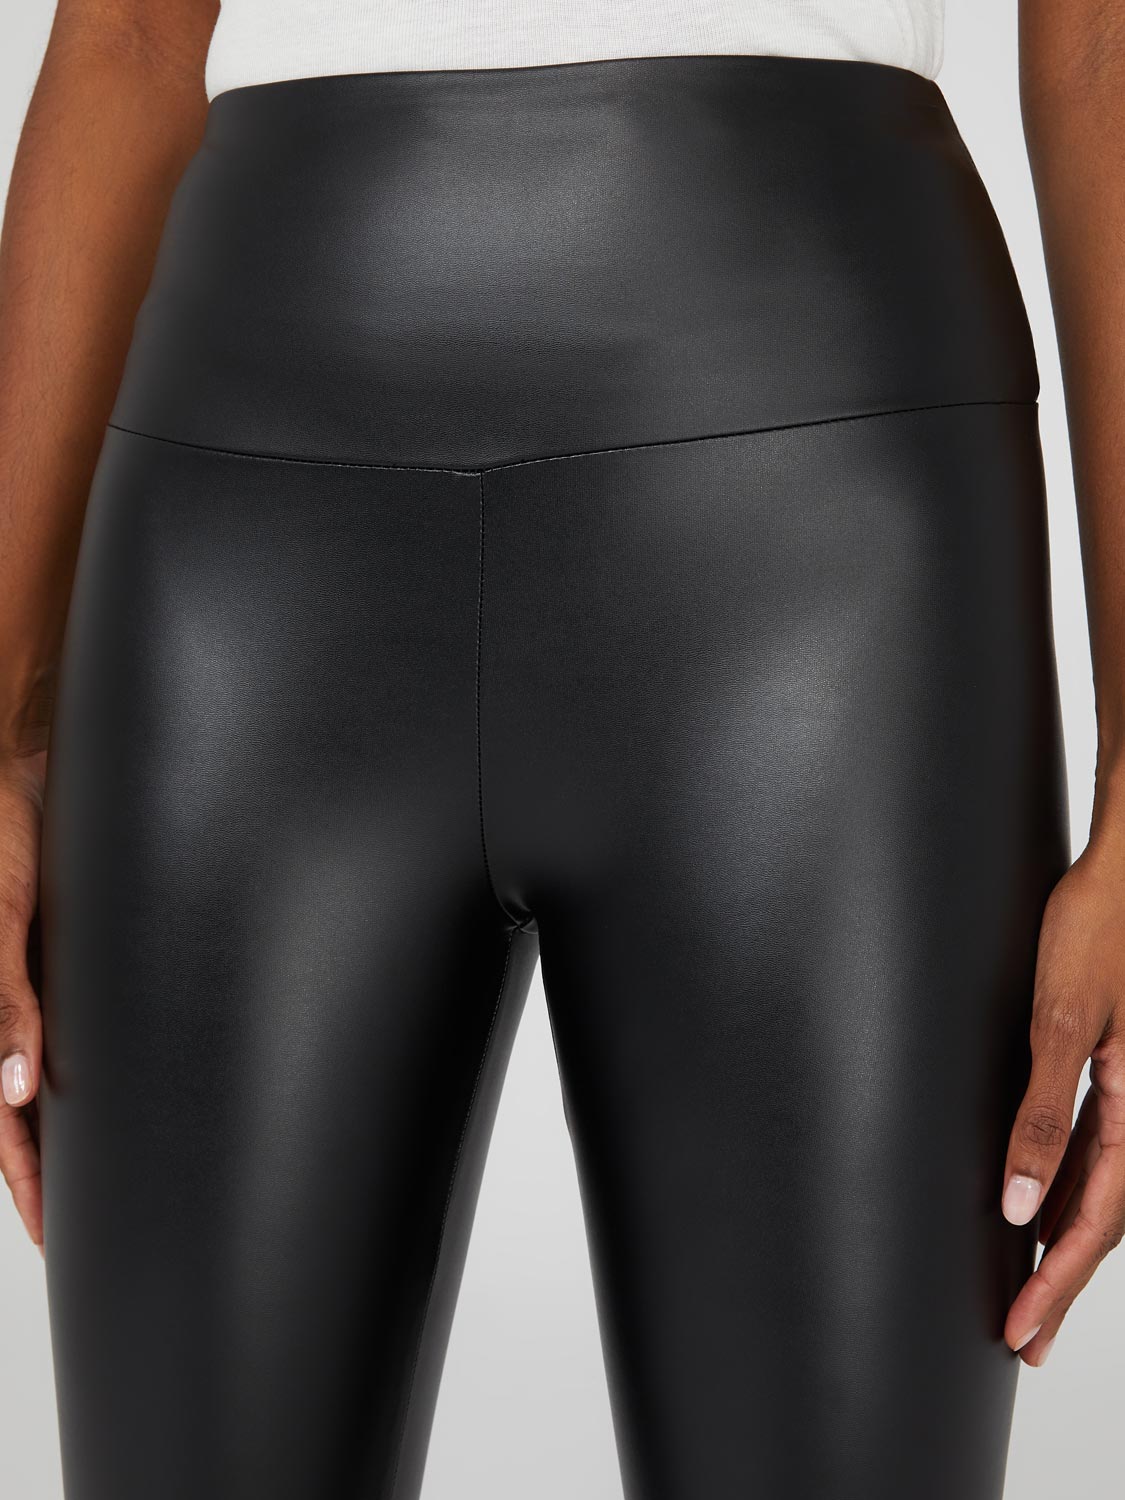 ⚜️Shosho Faux Leather Leggings⚜️6 For $25 in 2024